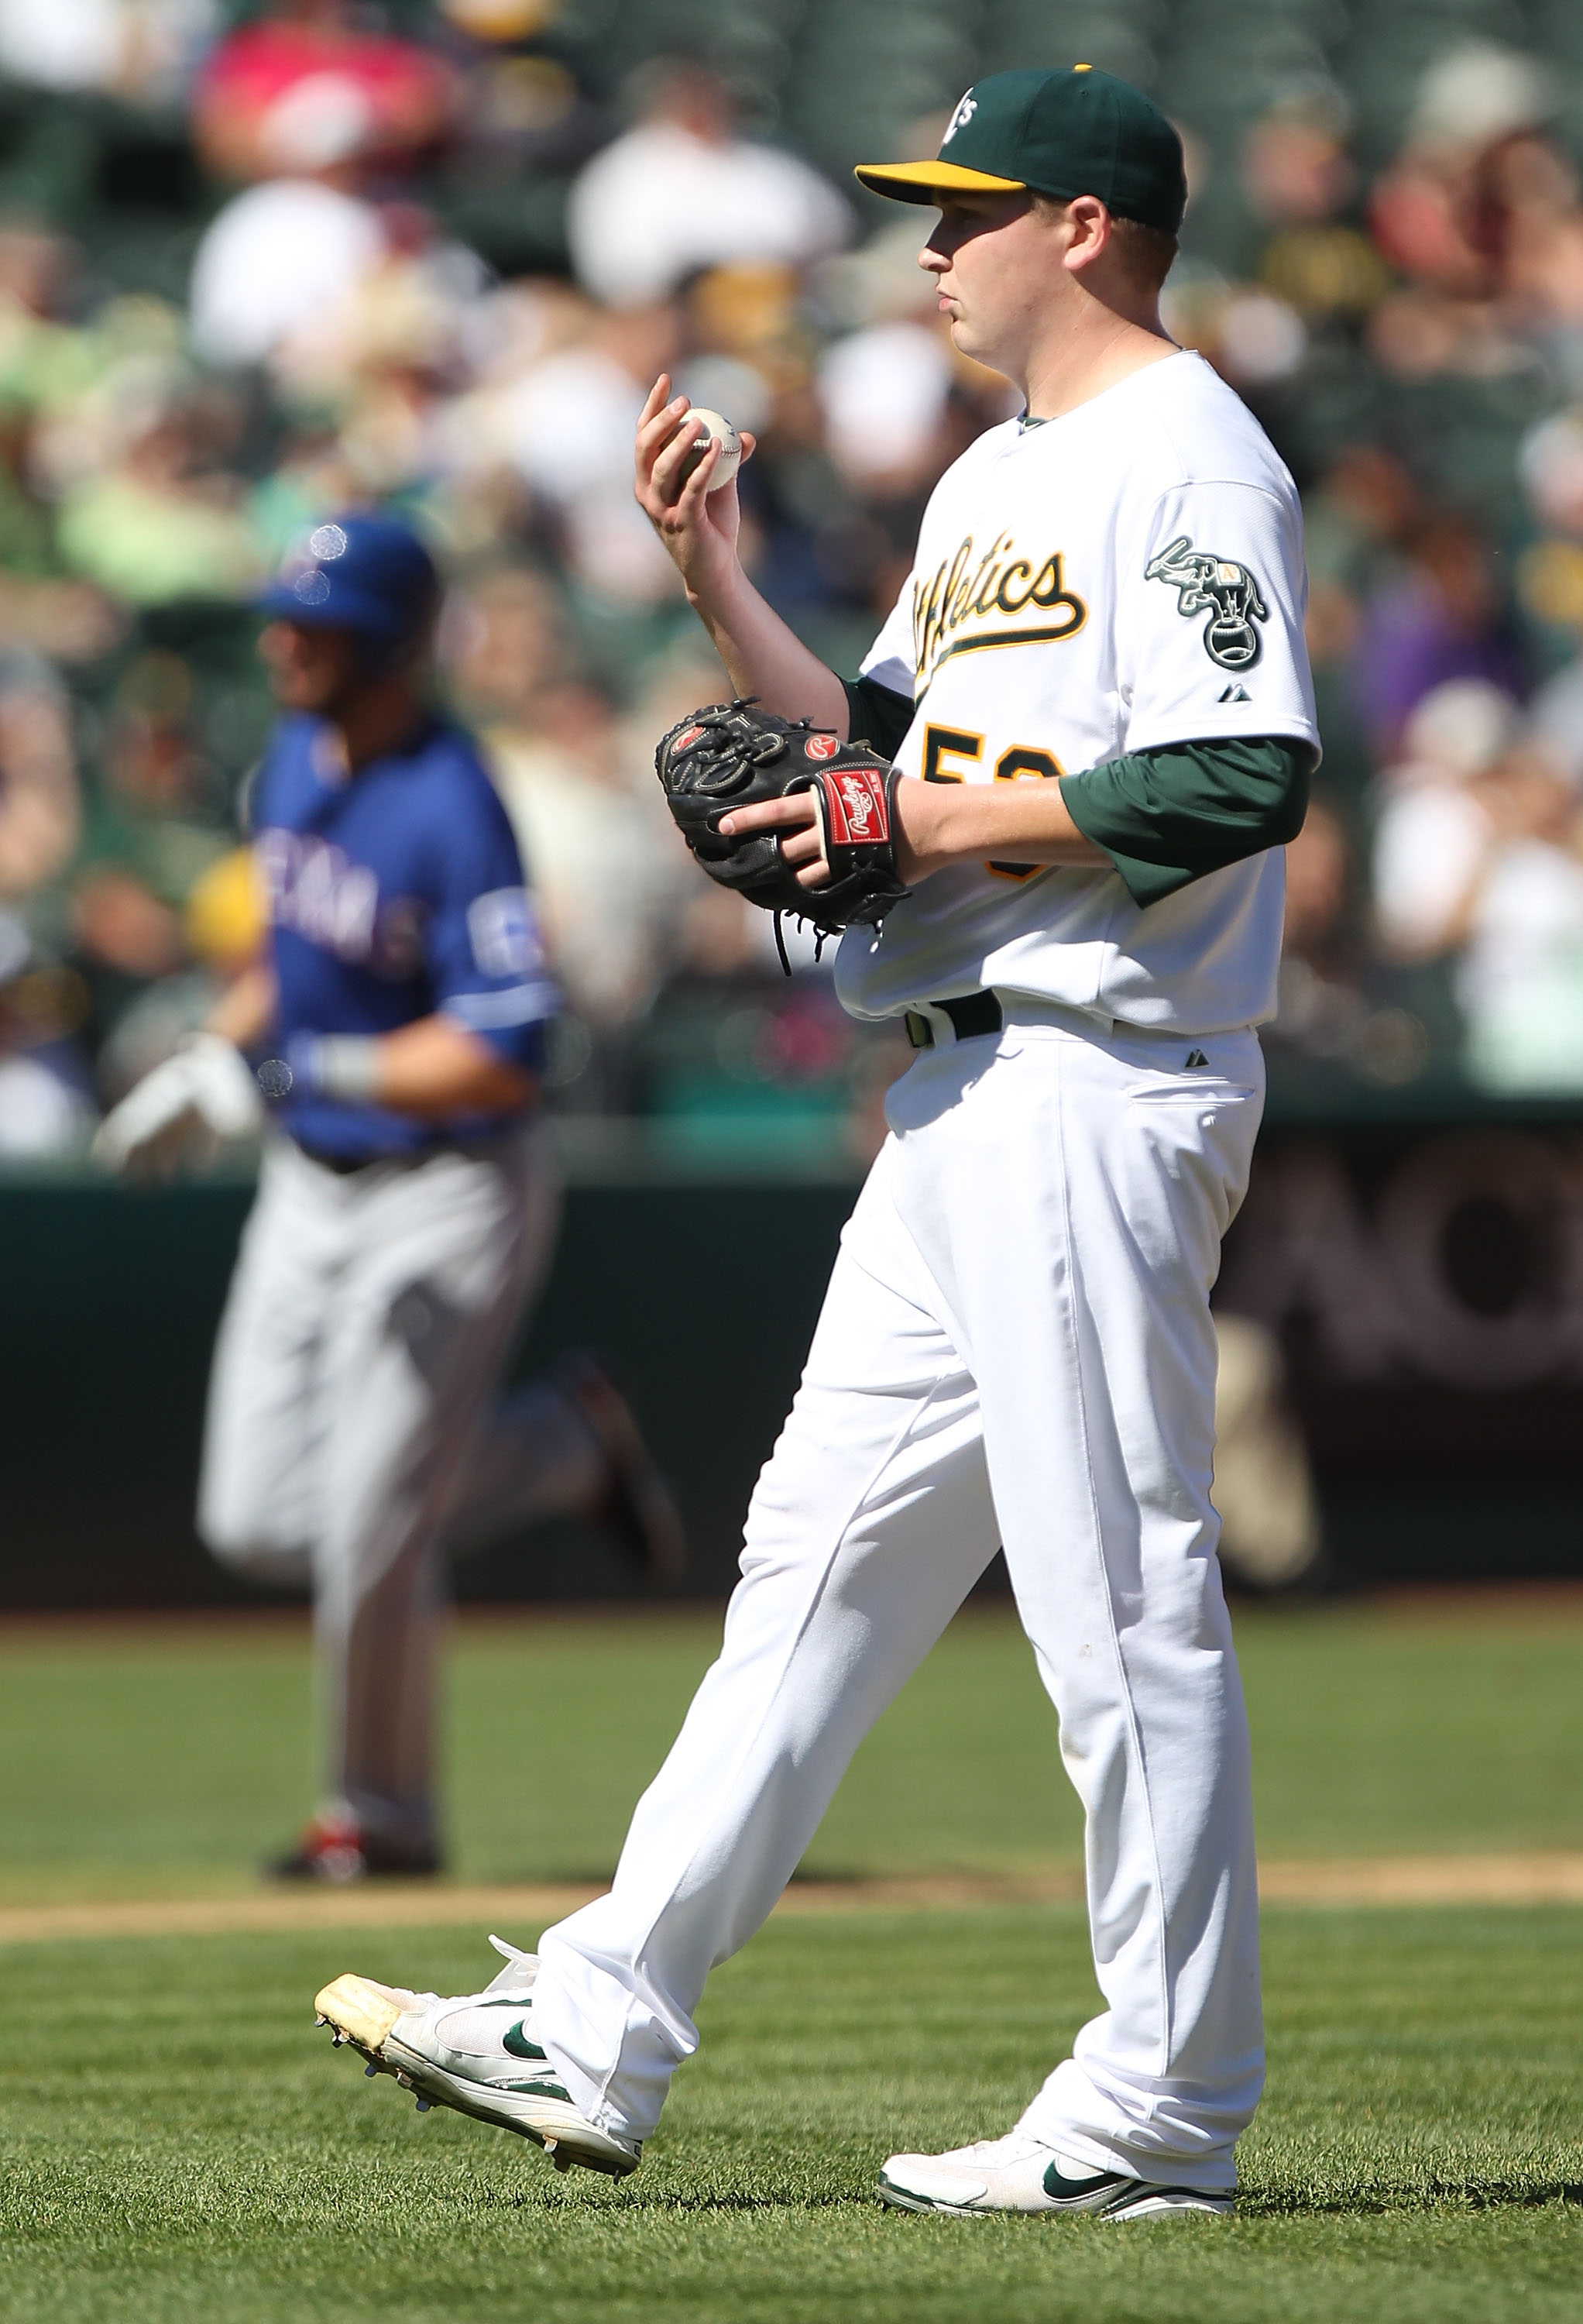 OAKLAND, CA - SEPTEMBER 26:  Jeff Francoeur #21 of the Texas Rangers rounds the bases after hitting a home run off of Trevor Cahill #53 of the Oakland Athletics during a Major League Baseball game at the Oakland-Alameda County Coliseum on September 26, 20